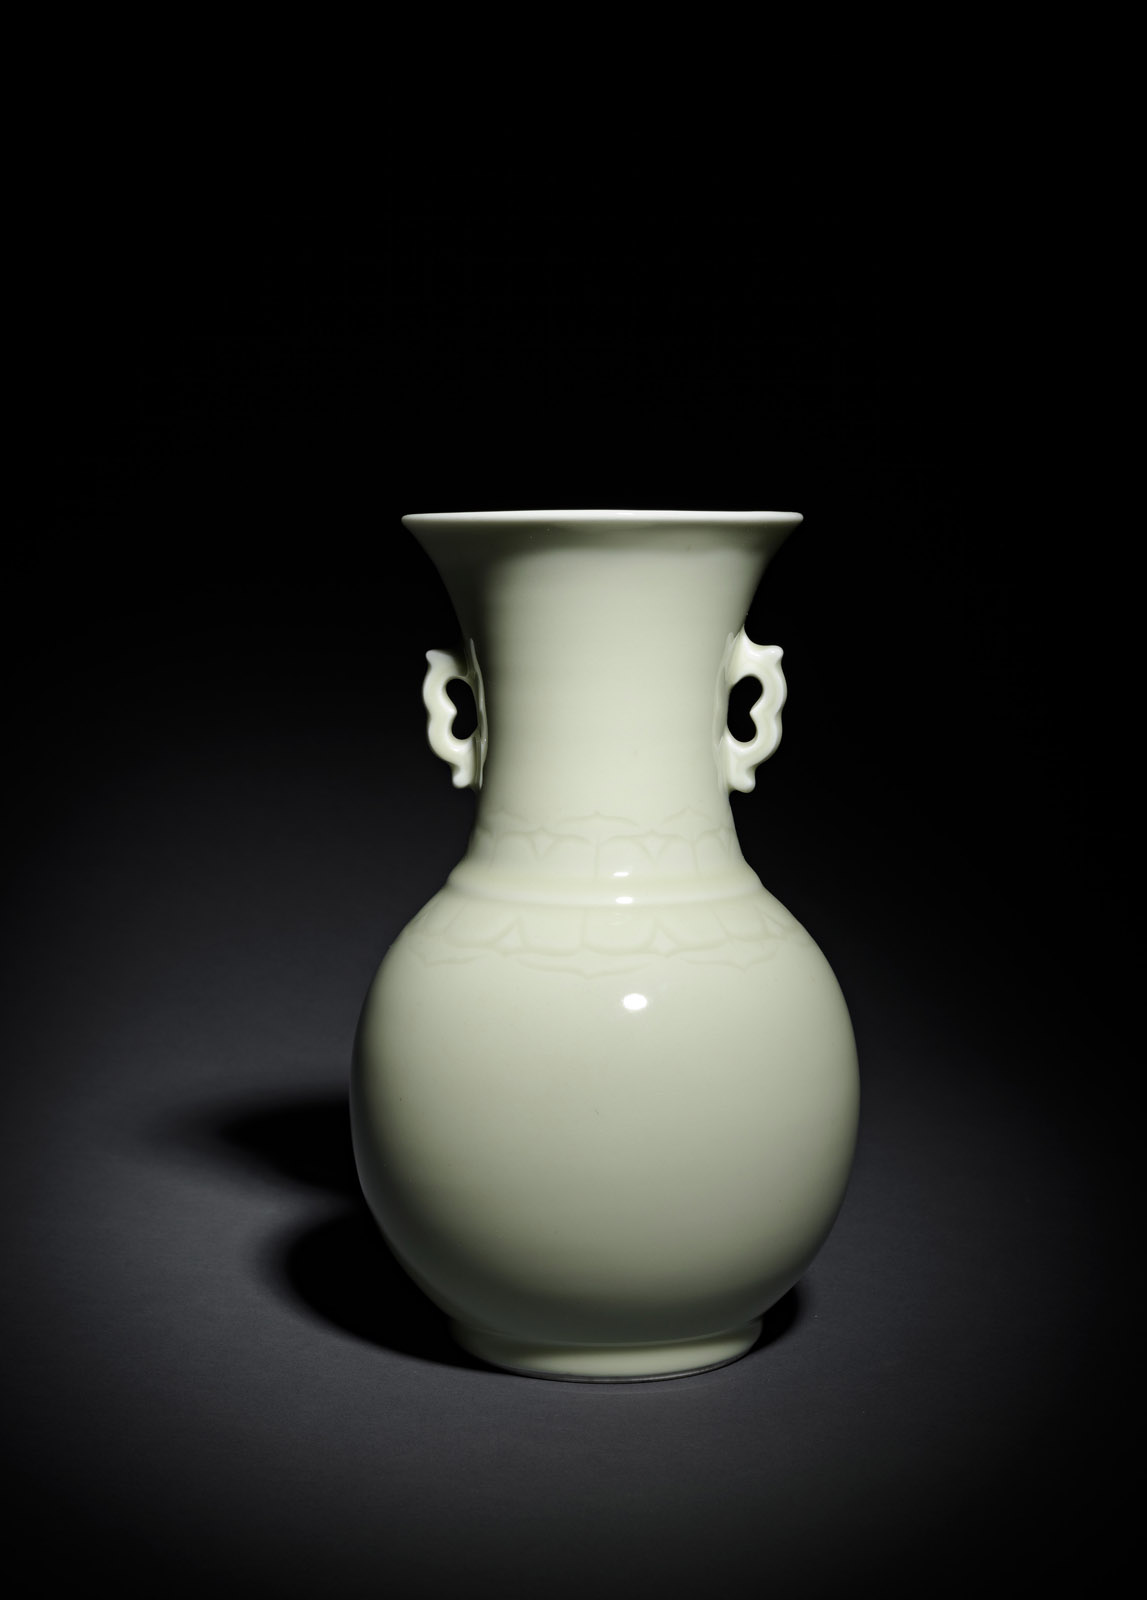 <b>A YELLOW-GREEN GLAZED PORCELAIN VASE WITH TWO HANDLES</b>